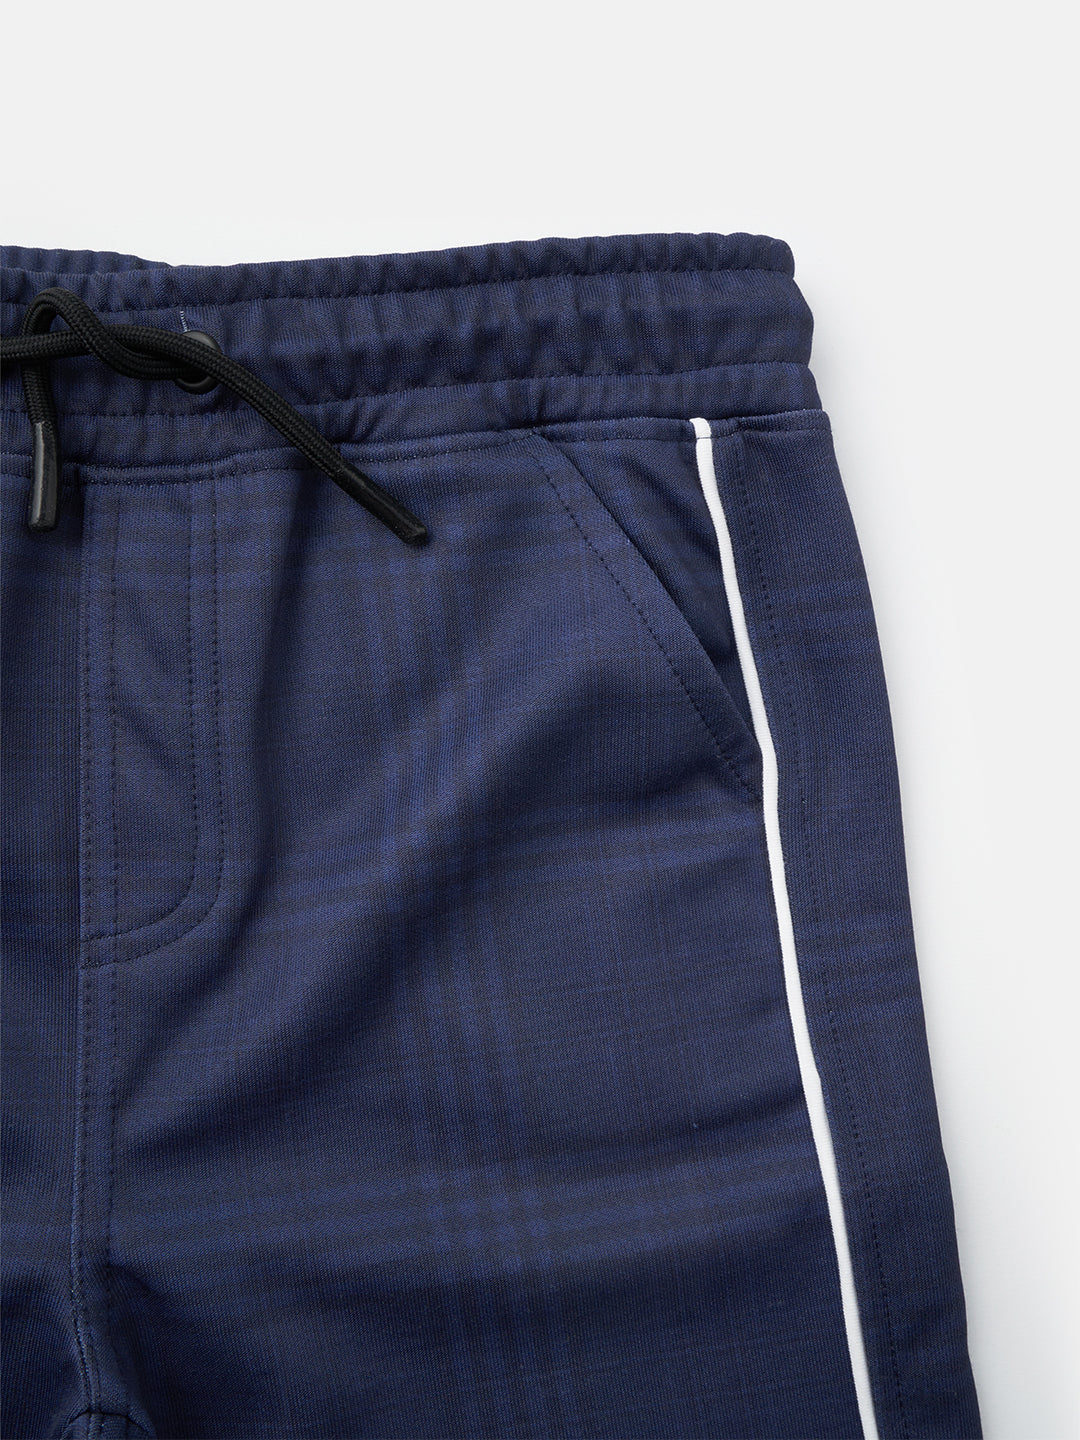 Boys Solid Navy Piped Track Pants